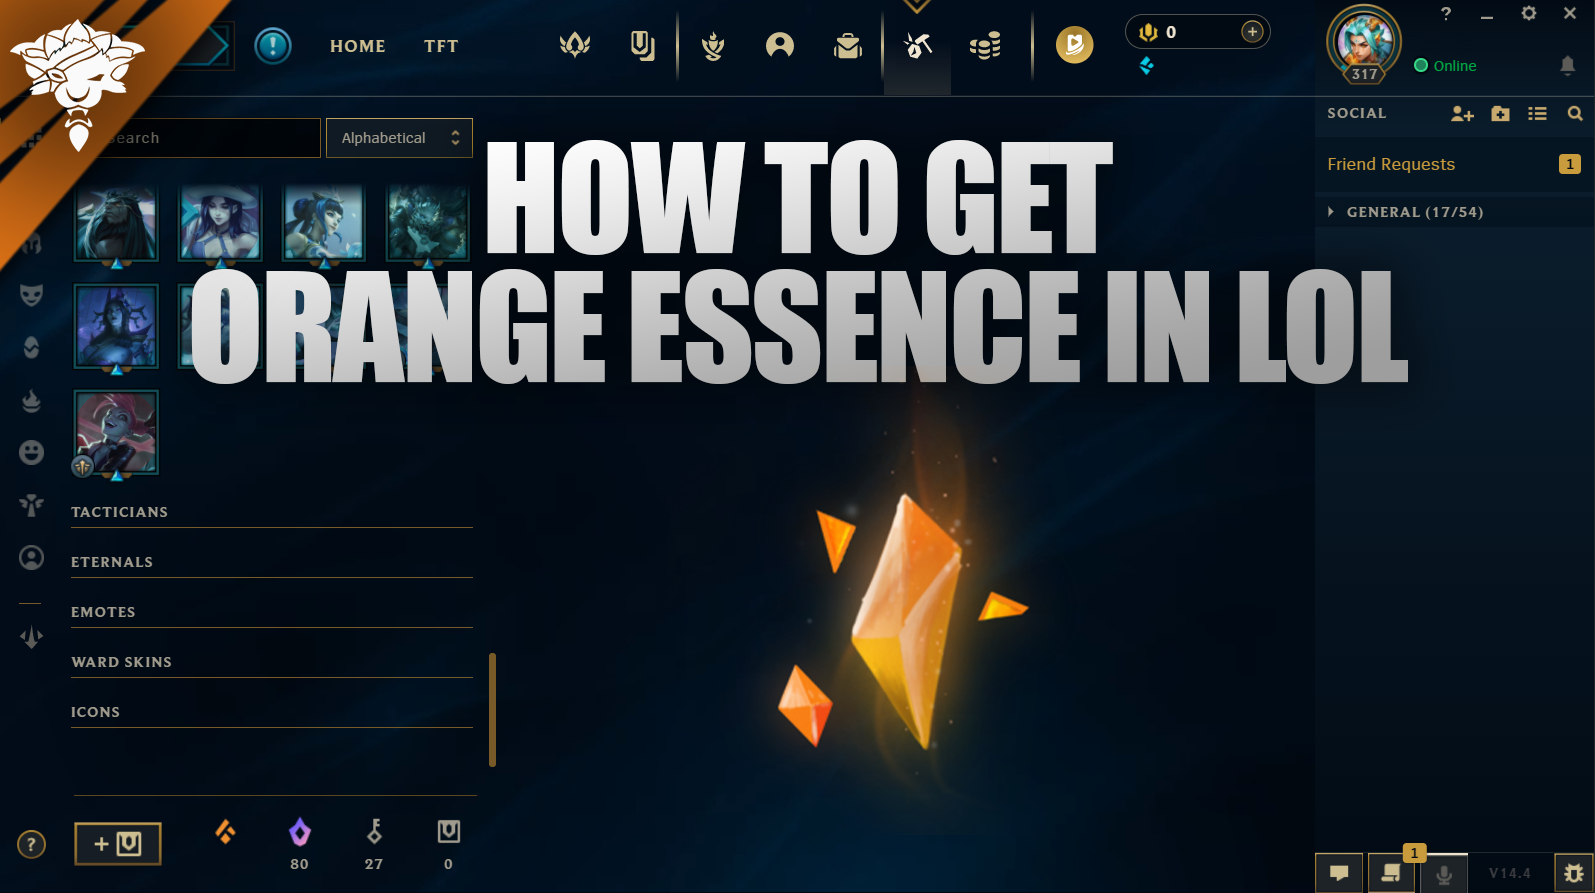 How To Get Orange Essence in LoL